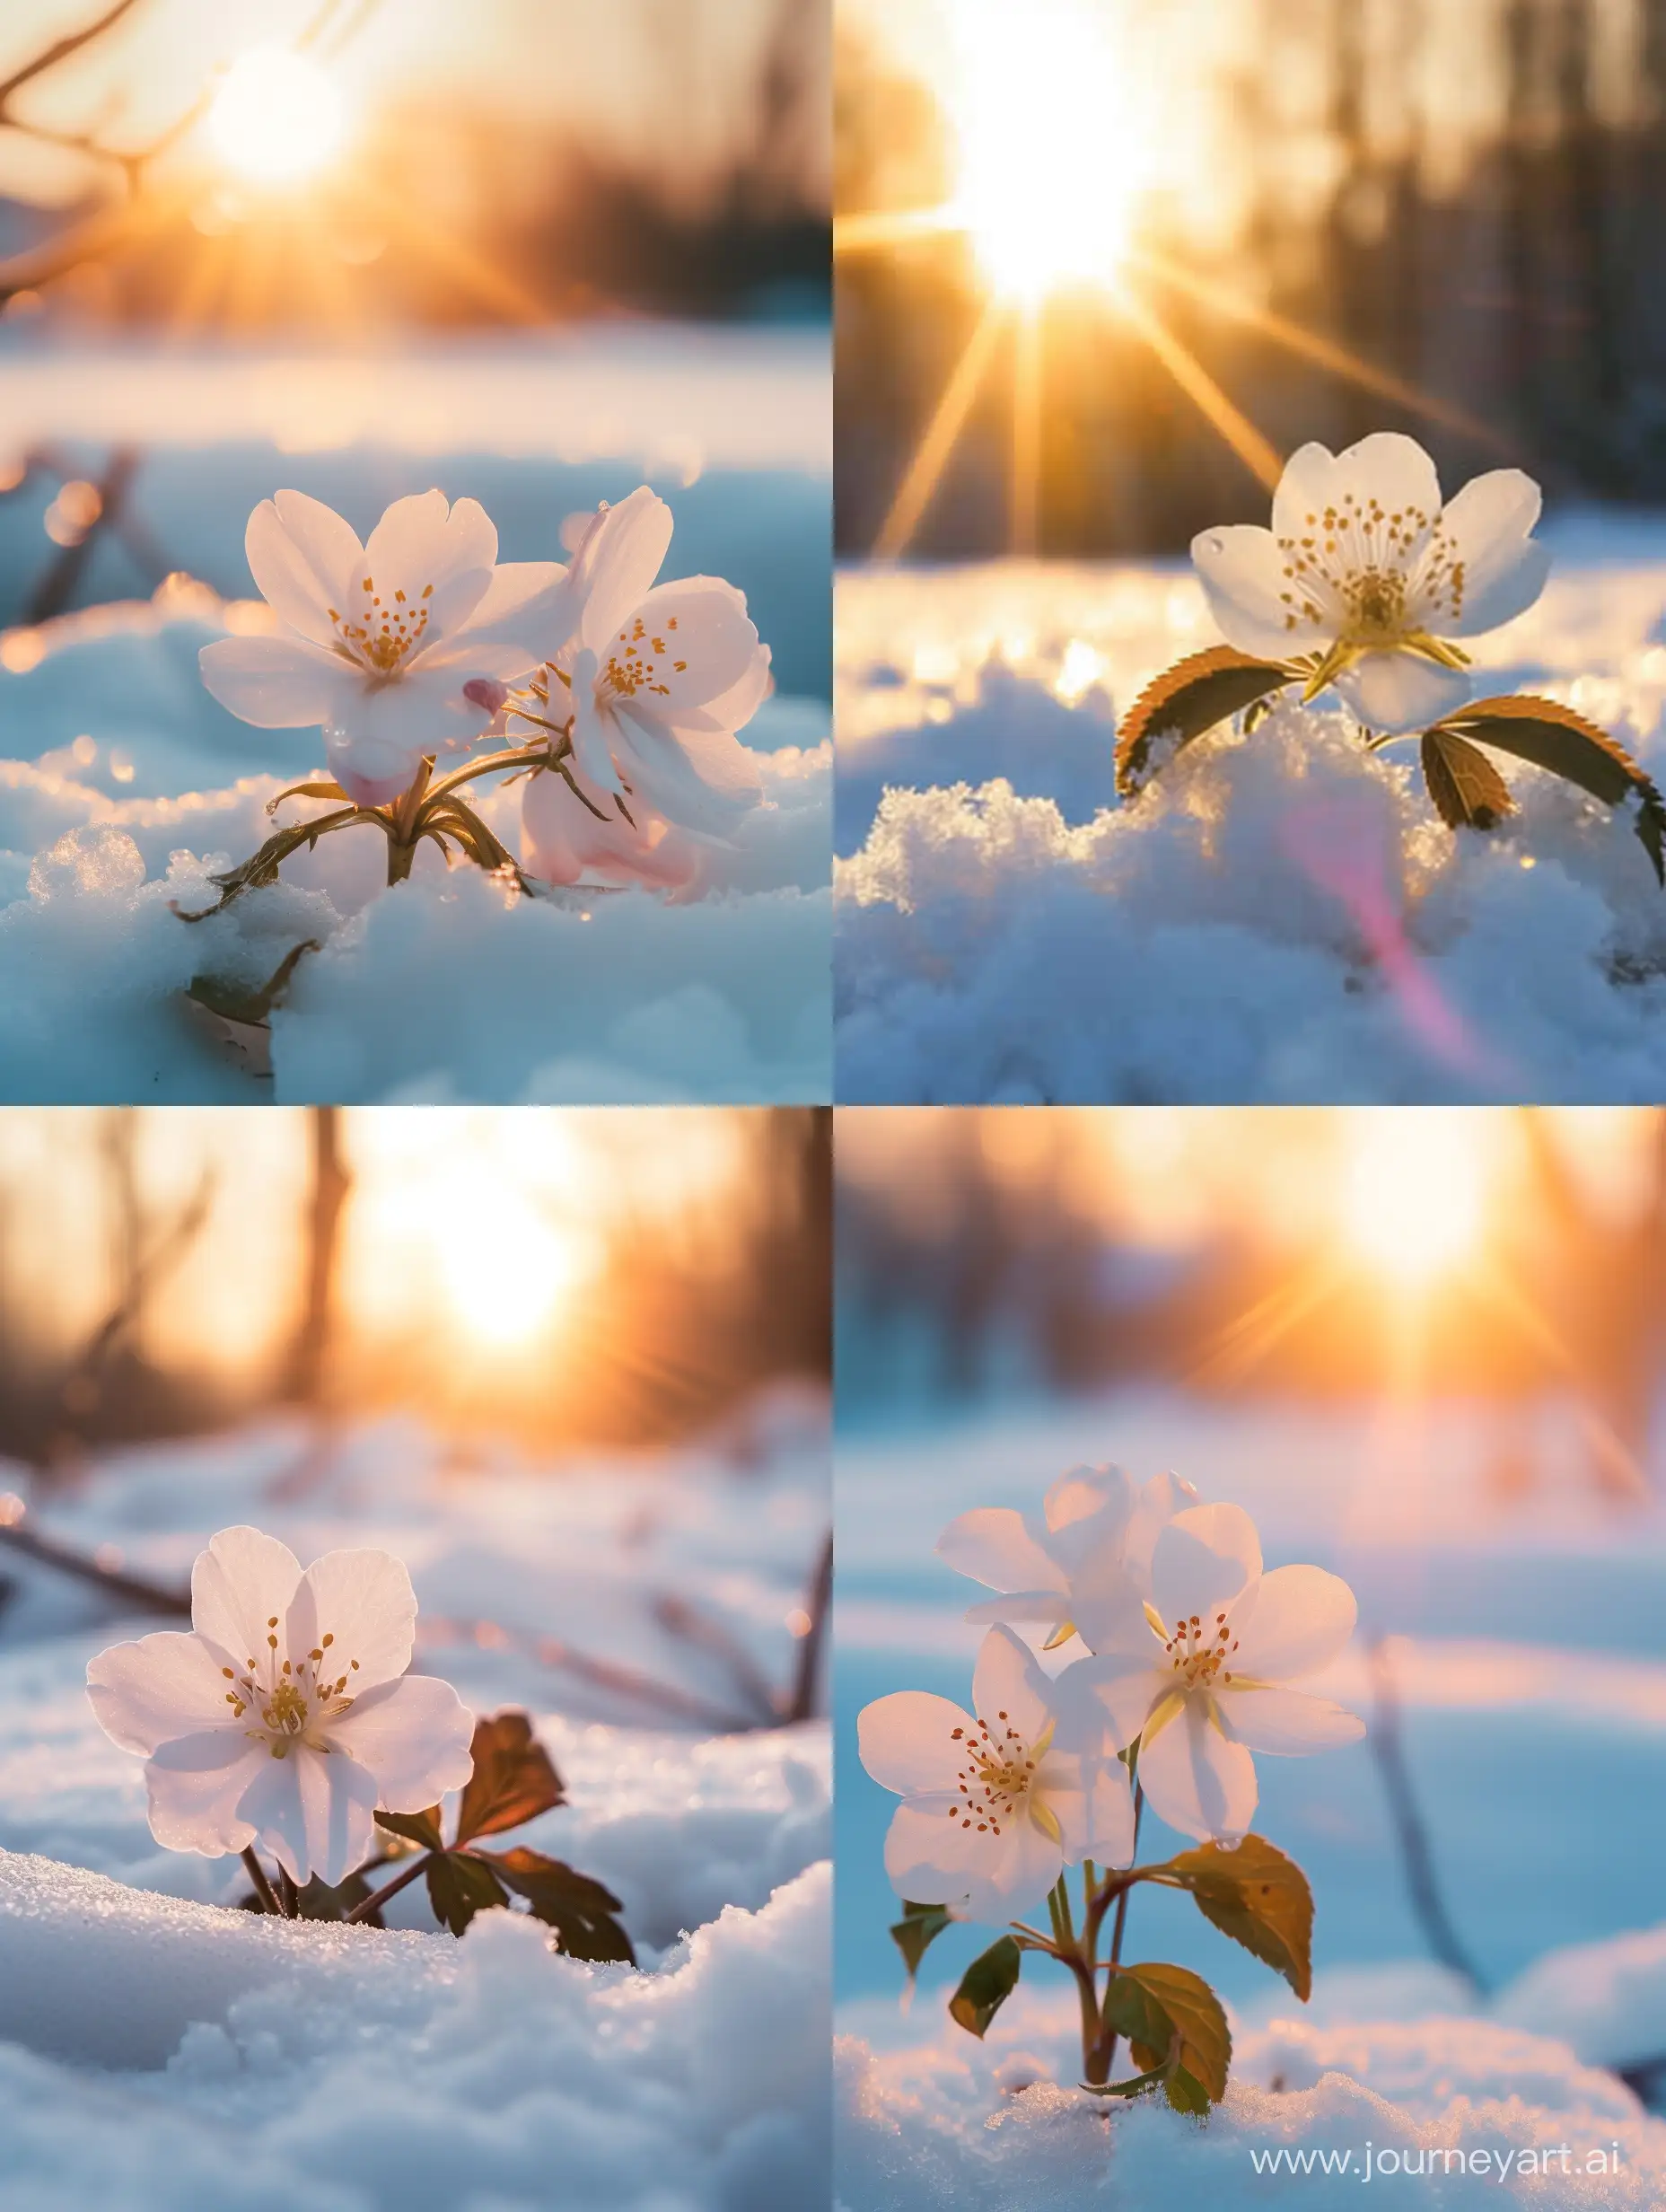 a serene and beautiful moment of a white flower blooming amidst the snow, with the beautiful morning rays of the sunrise in the background. The contrast between the cold snow and warm sunlight creates a harmonious balance. Focus hi-resolution, closeup macro shot